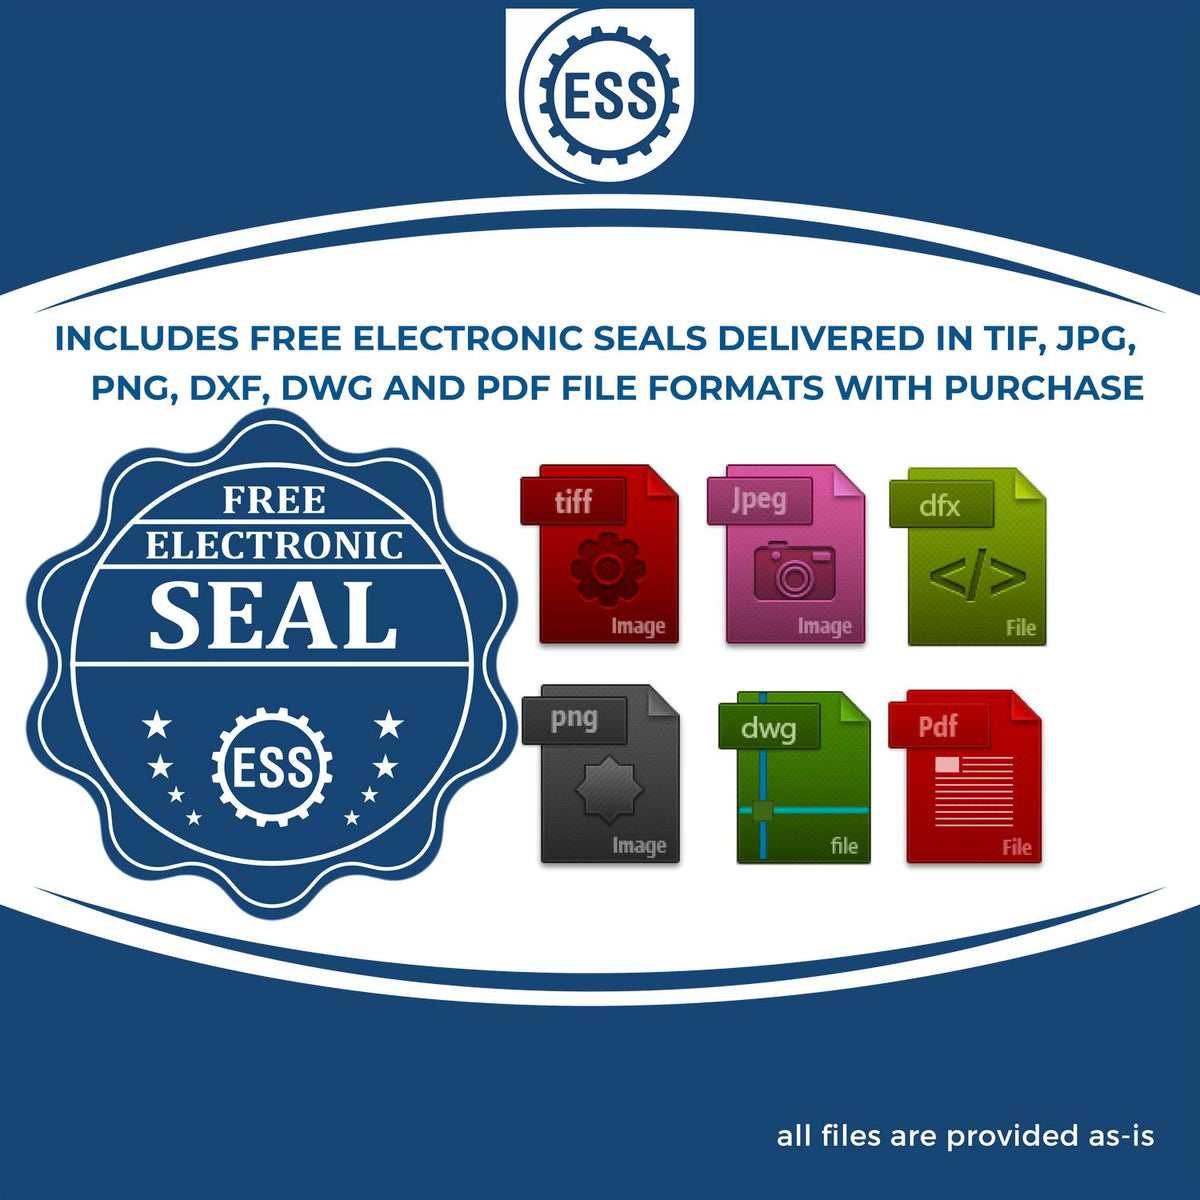 An infographic for the free electronic seal for the Slim Pre-Inked Wyoming Landscape Architect Seal Stamp illustrating the different file type icons such as DXF, DWG, TIF, JPG and PNG.